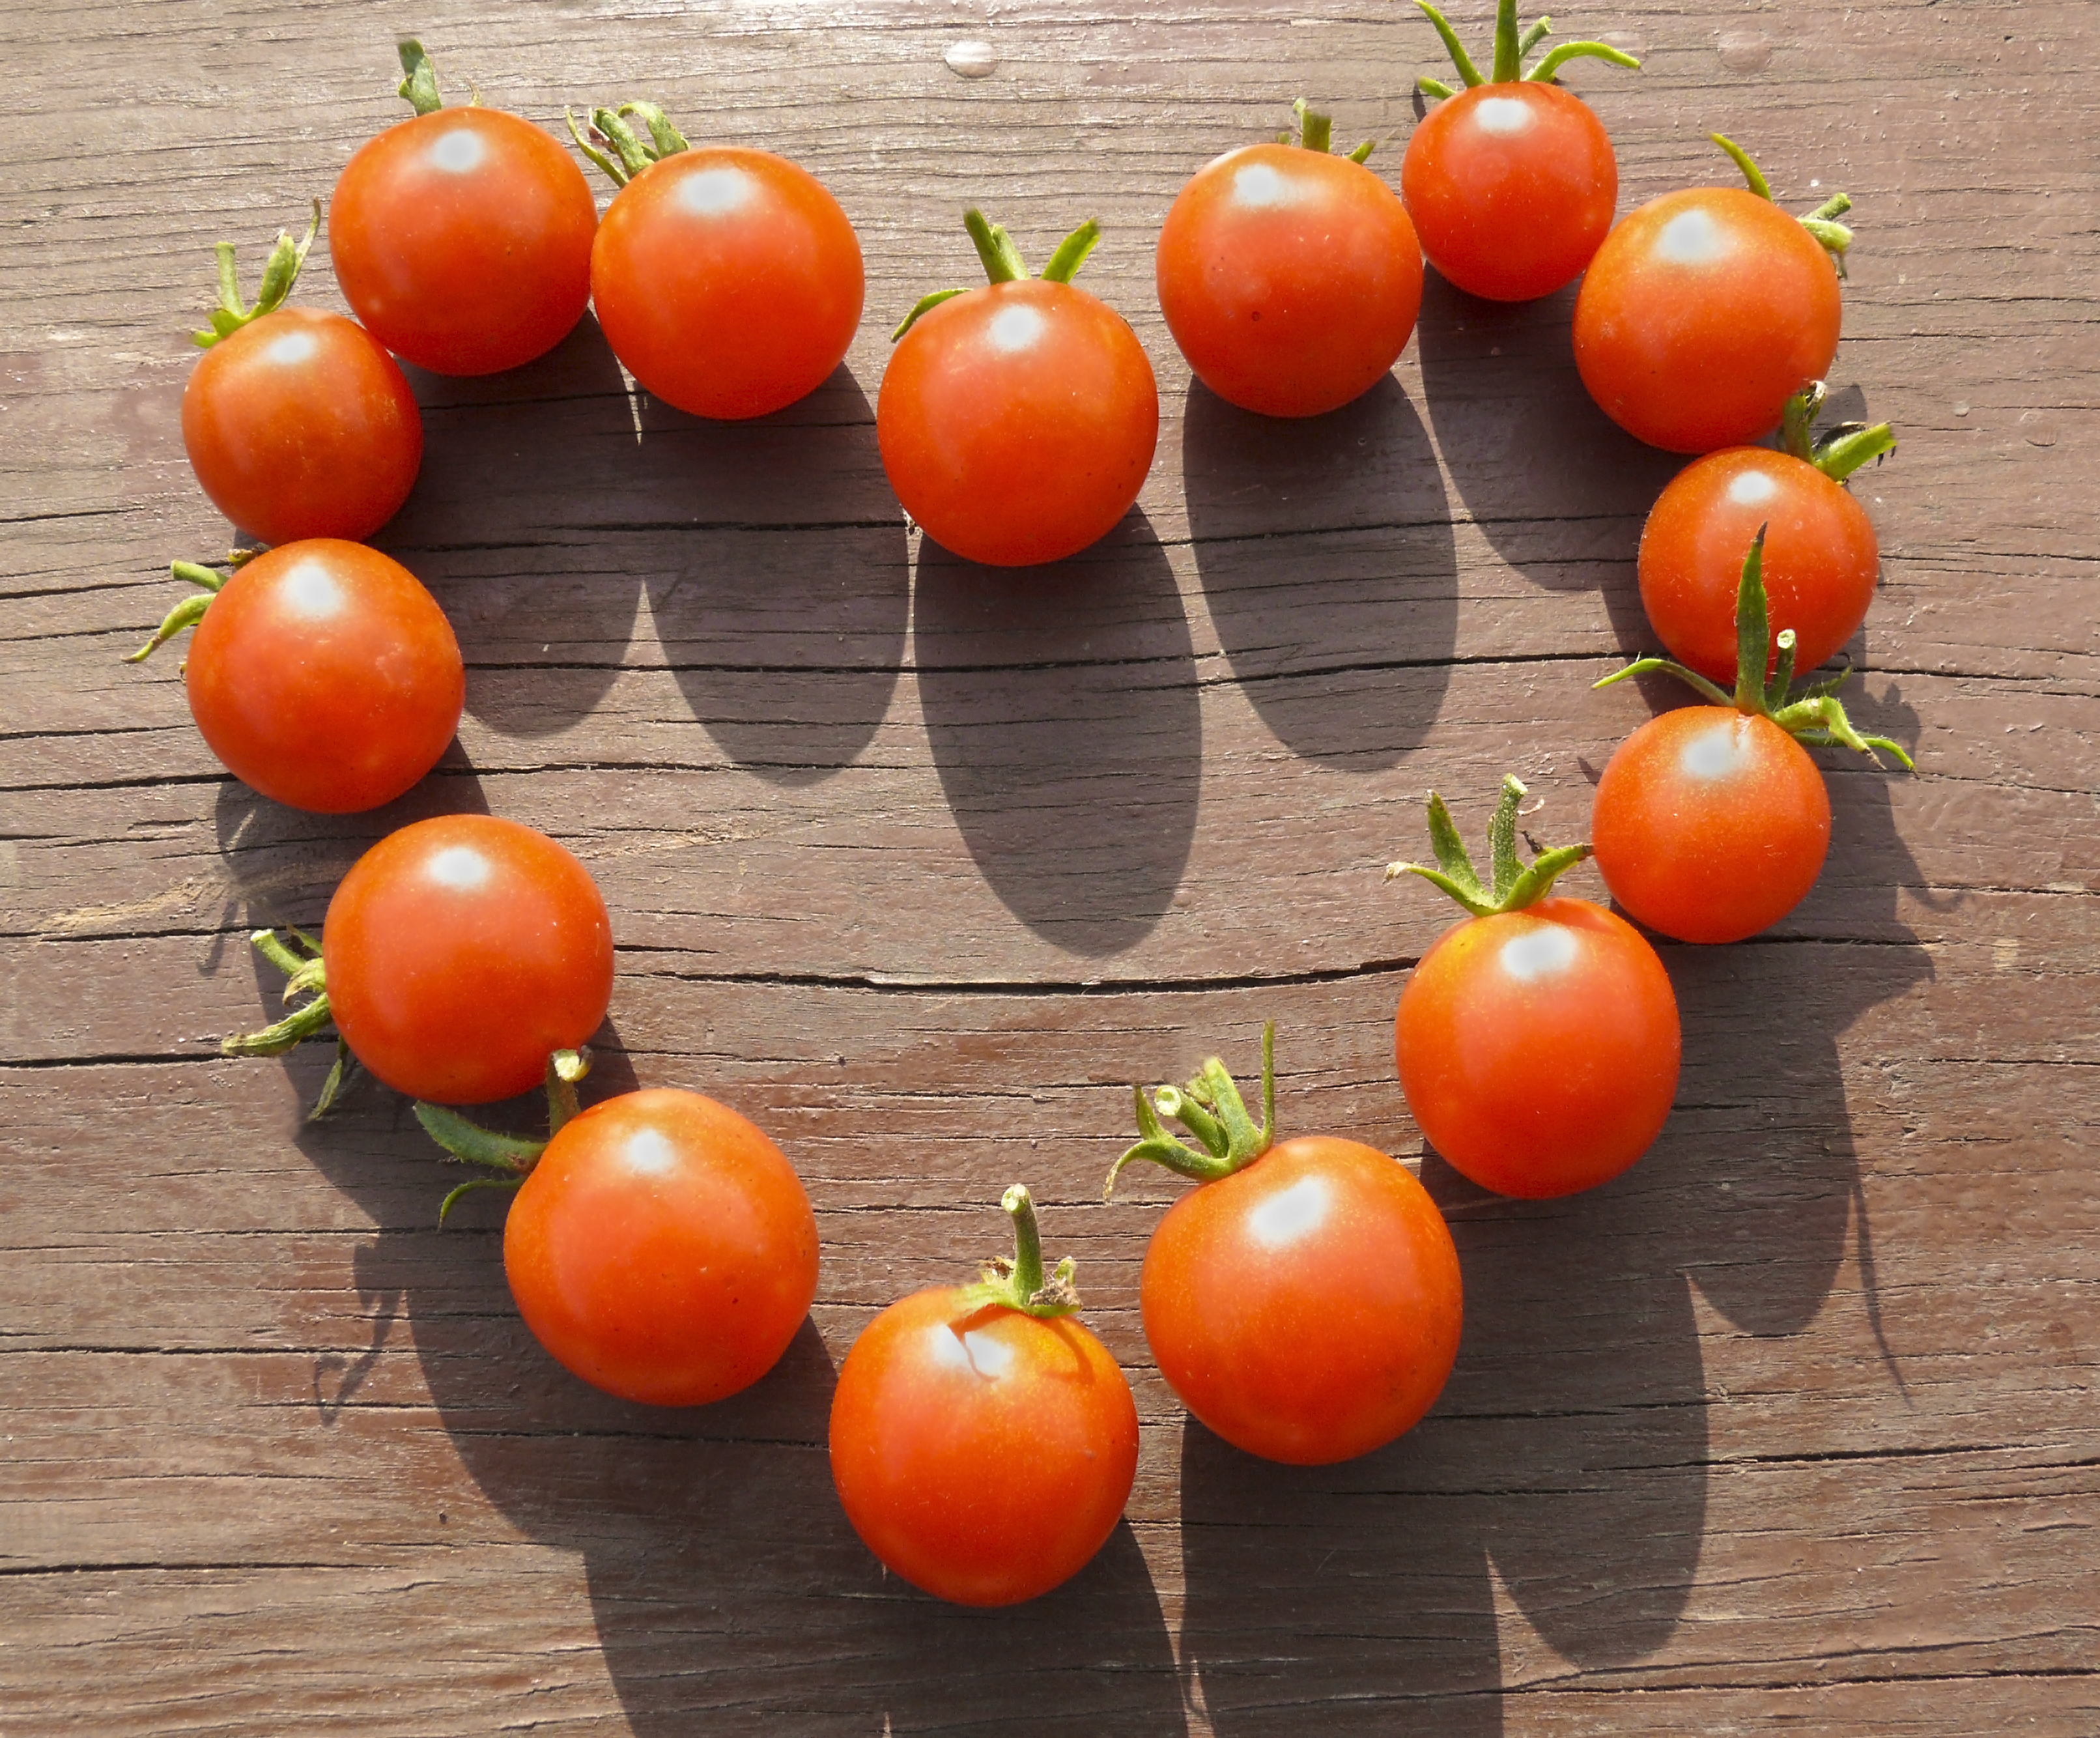 Natural sign of love - heart made from small tomatoes